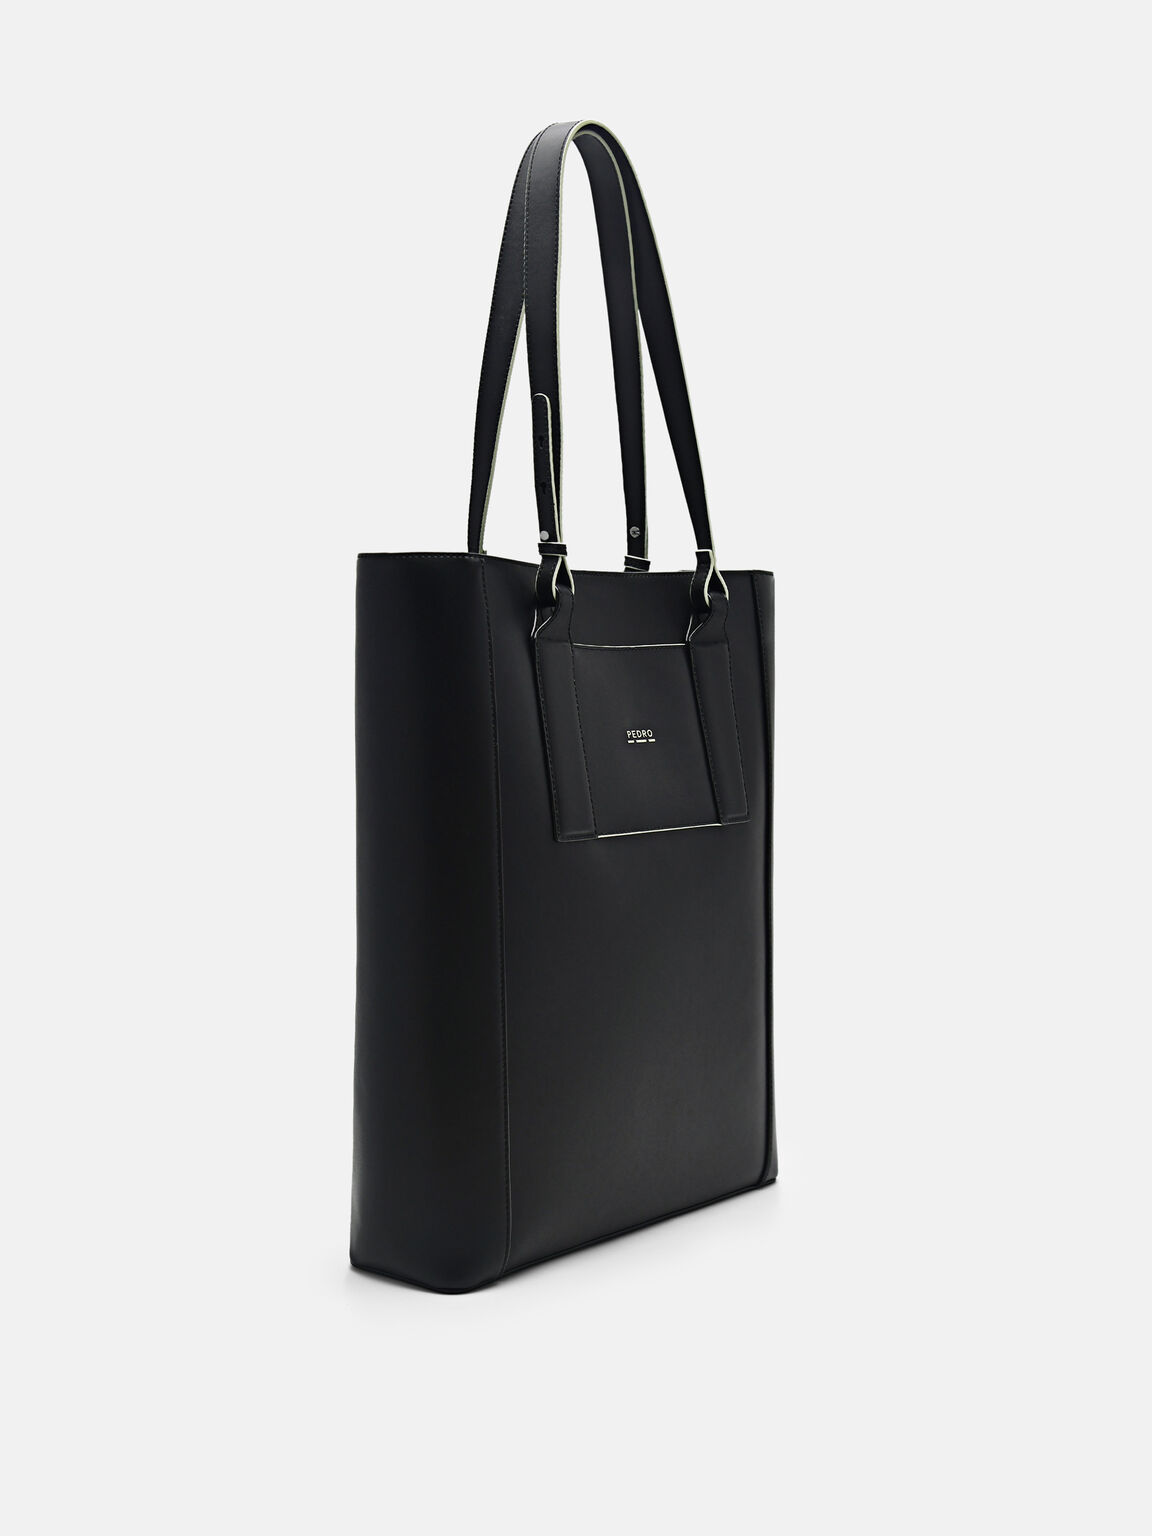 rePEDRO Recycled Leather Tote Bag, Black